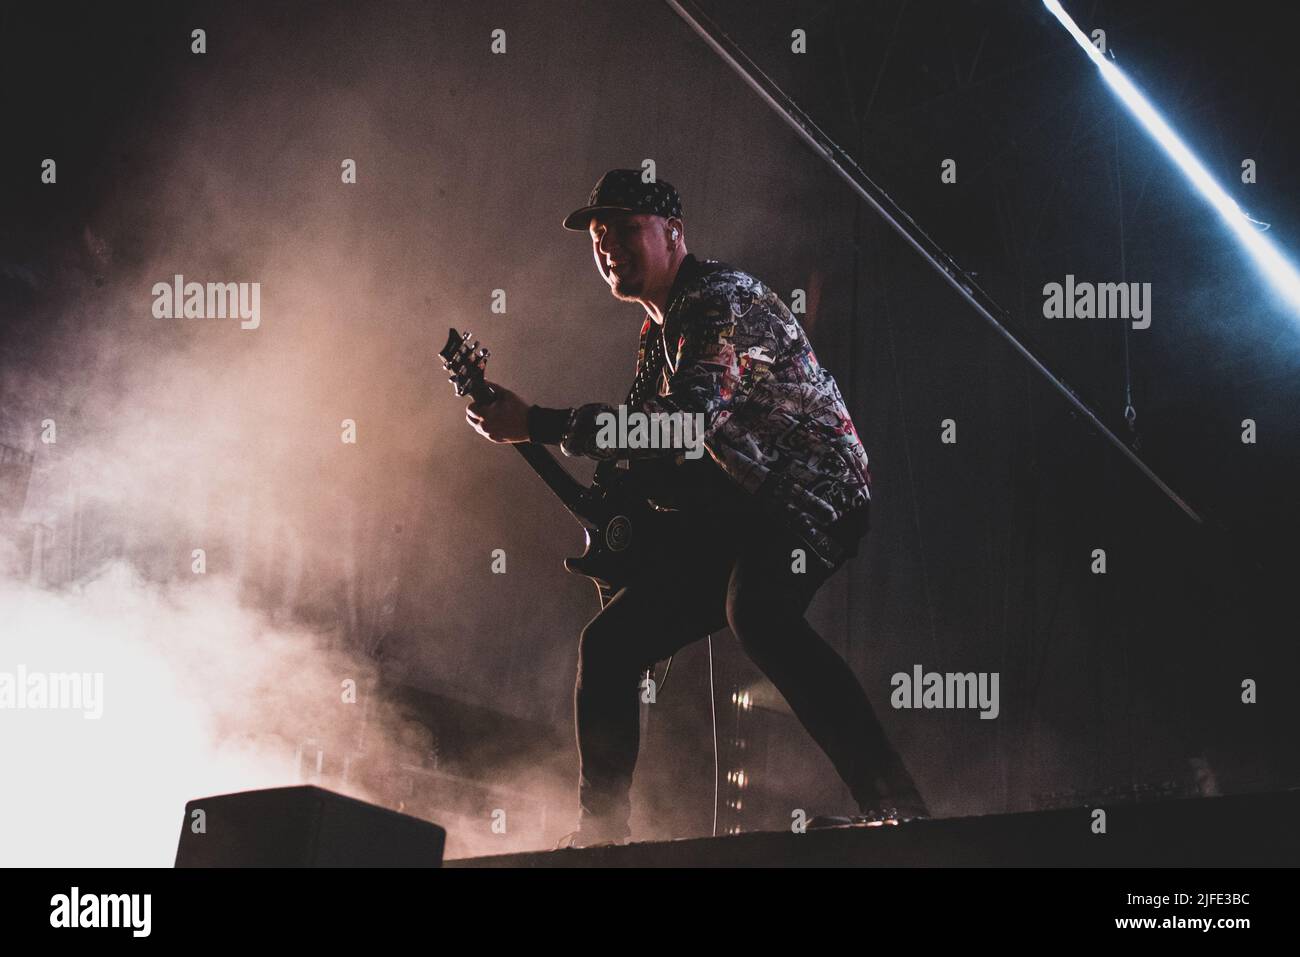 ITALY, COLLEGNO, JULY 1ST 2022: Ace, guitarist of the British rock band “Stunk Anansie”, performing live on stage at the “Flowers Festival” 2022 edition for the “Celebrating 25 years” tour Stock Photo